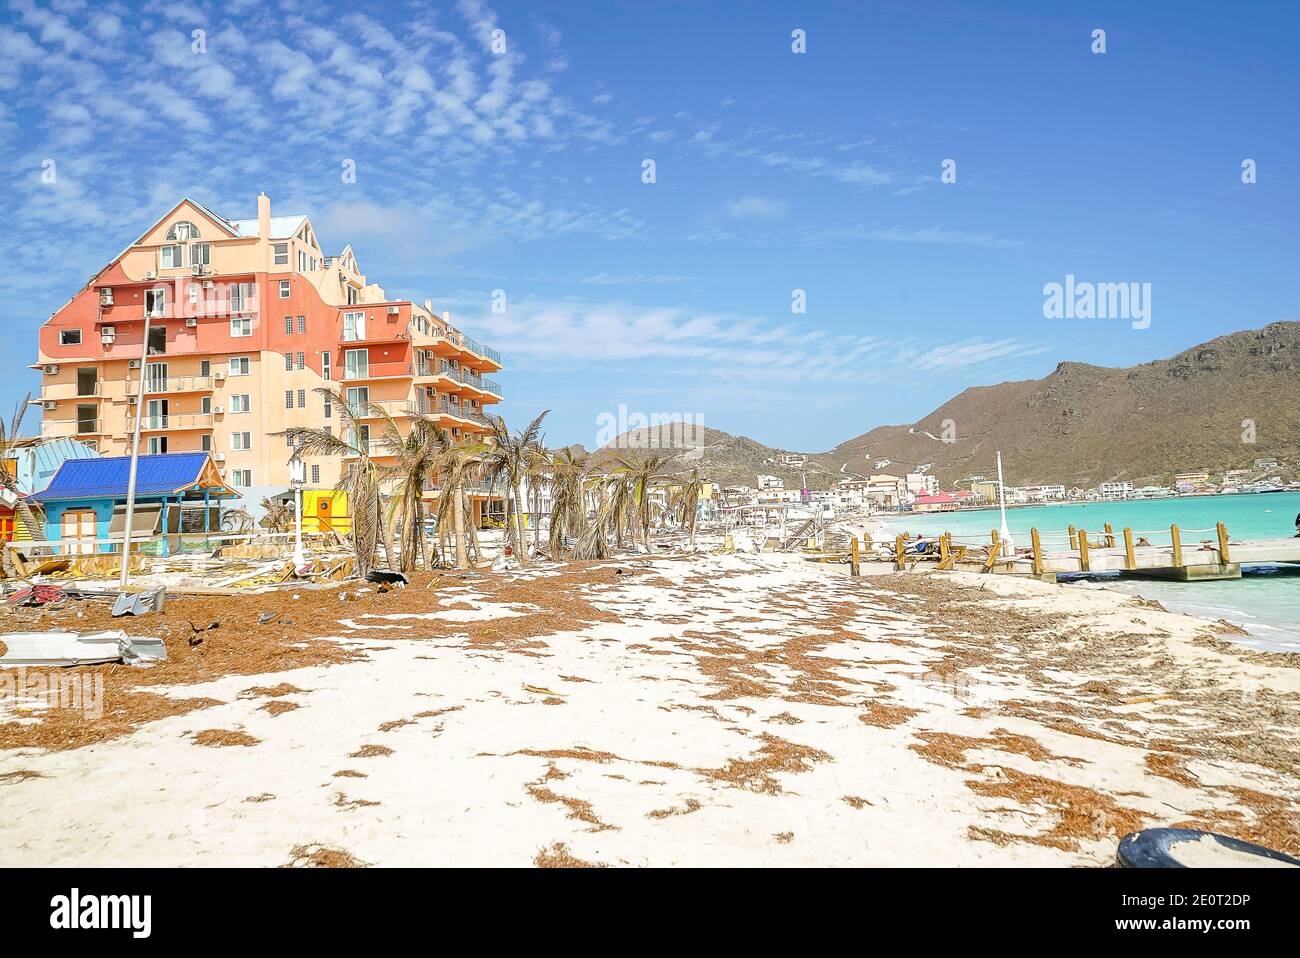 Damage cause by hurricane irma in the Caribbean island of st.maarten/st.martin in September 2017. Hurricane damage in the caribbean islands. Stock Photo